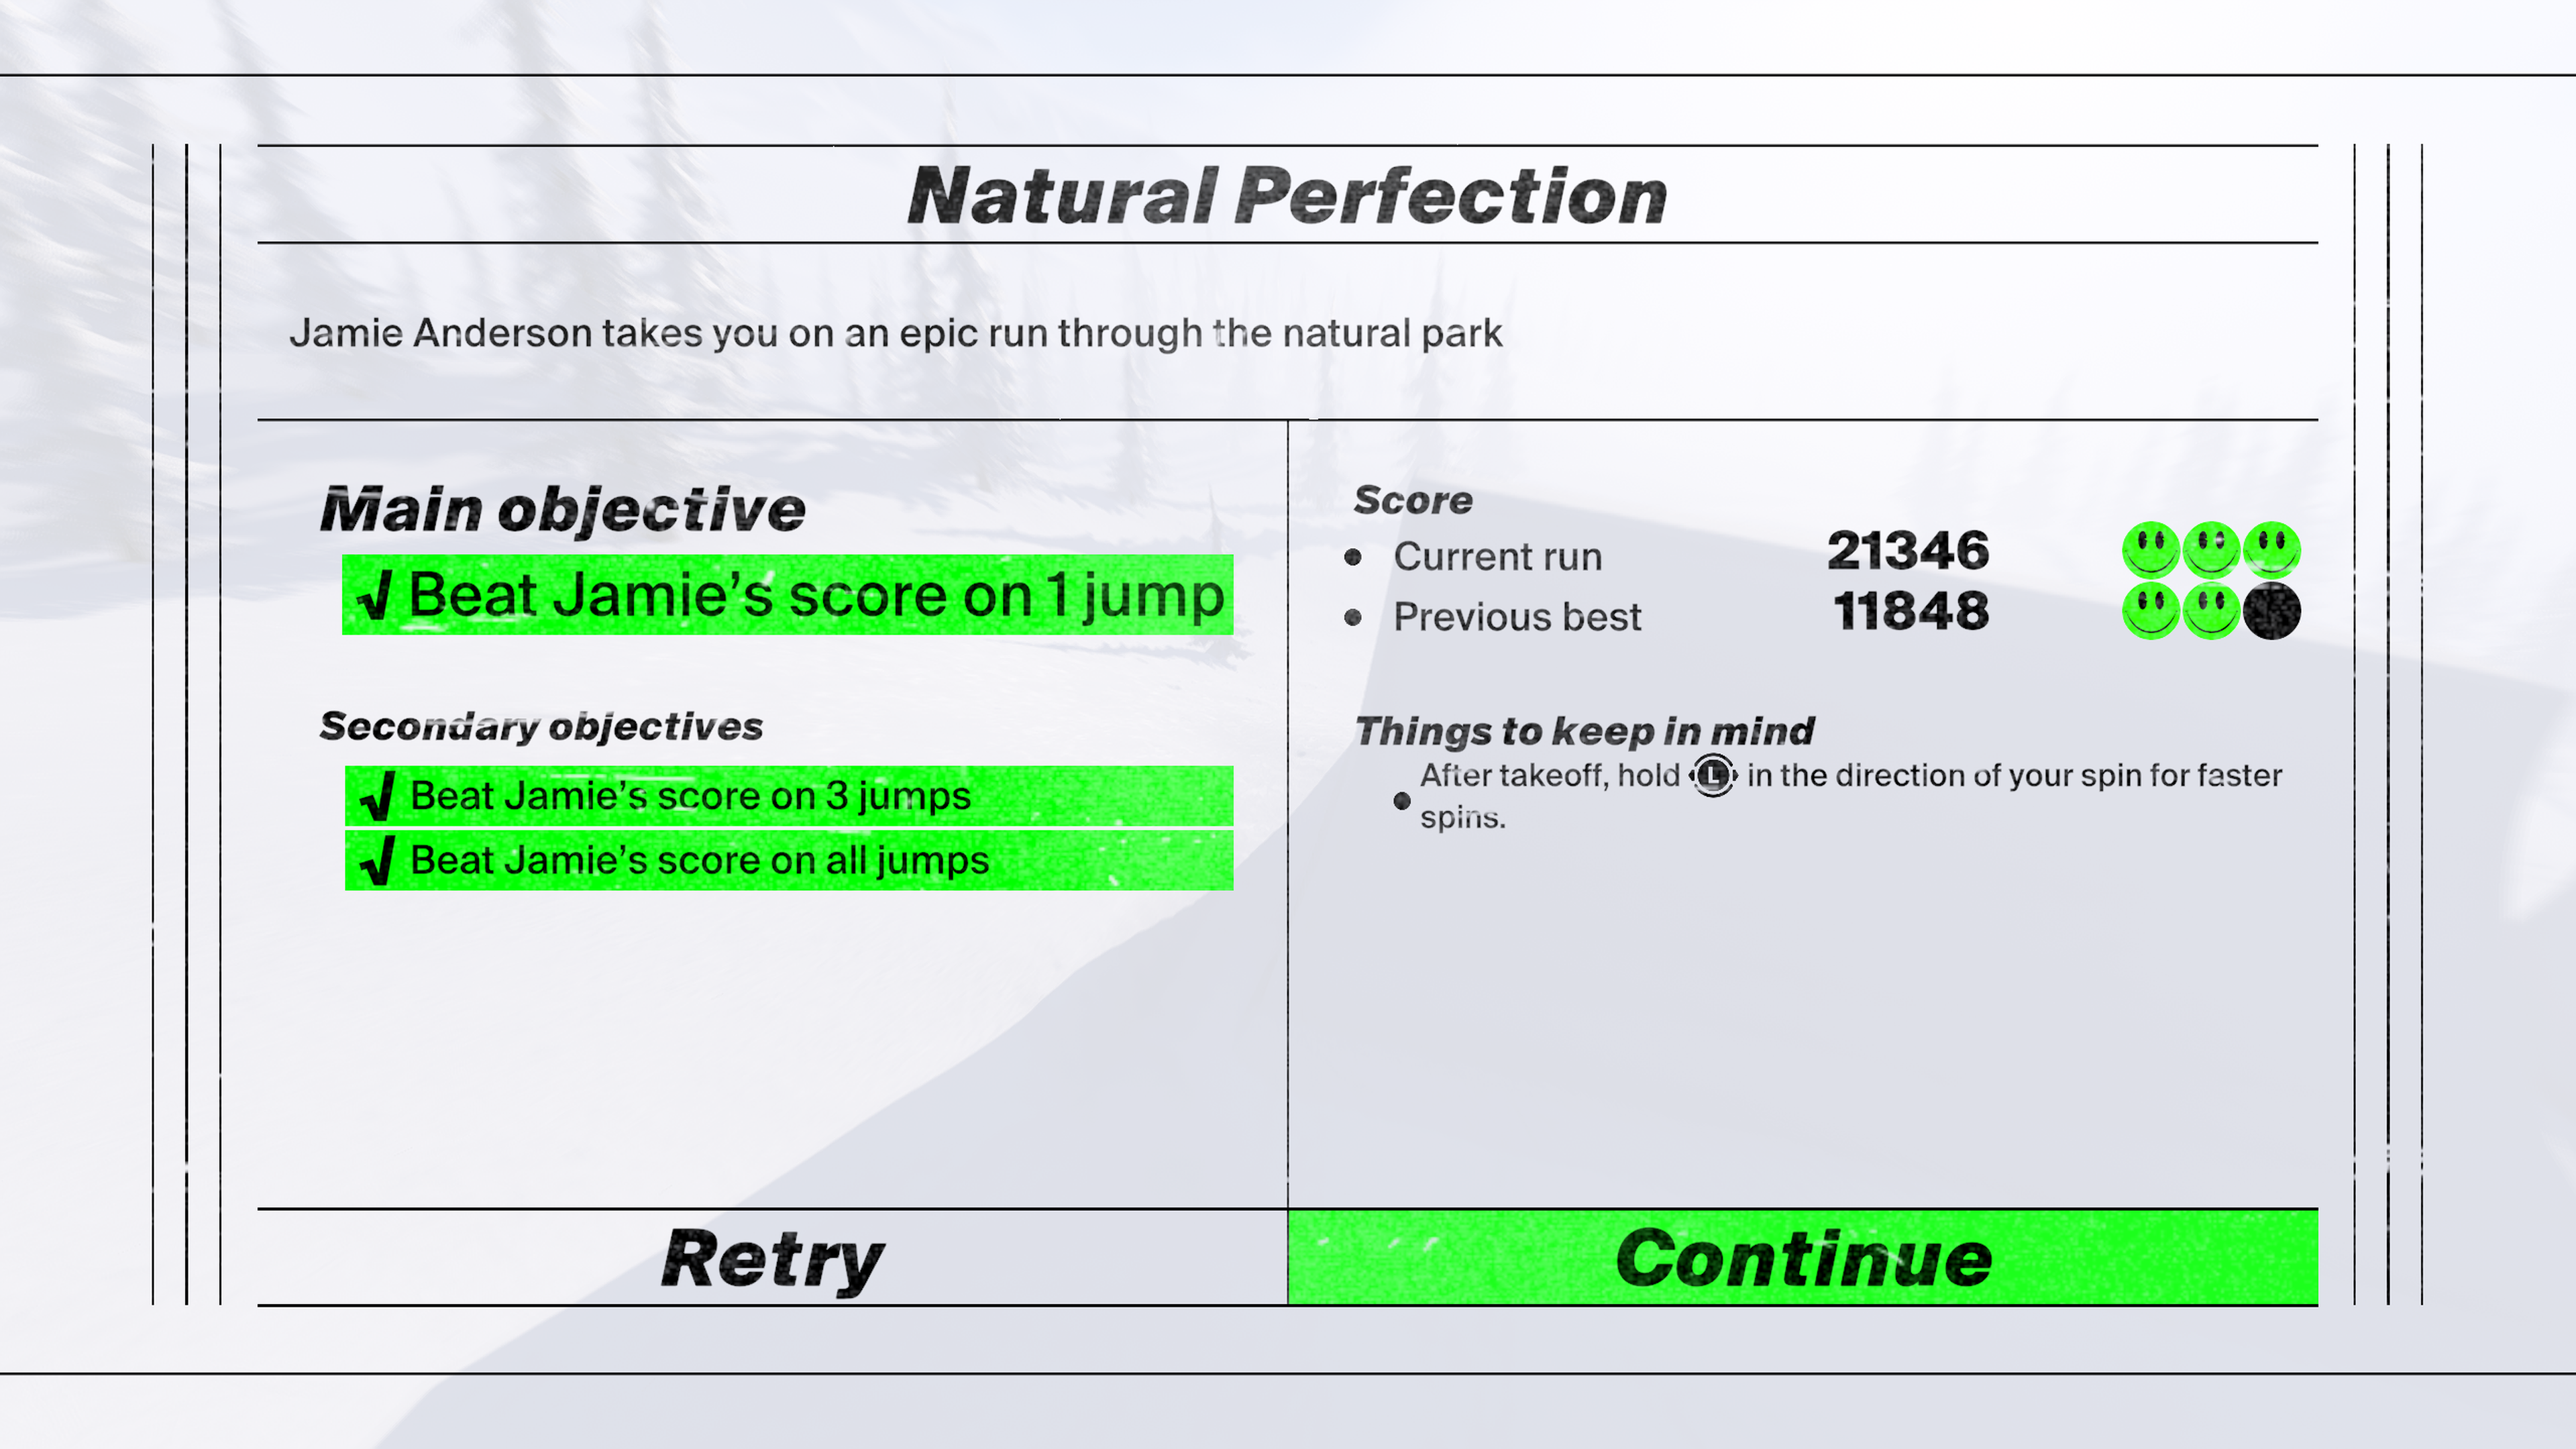 The Shredders PS5 game end of Mission score screen. The mission name at the top reads Natural Perfection. Below that is the mission description which reads "Jamie Anderson takes you on an epic run through the natural park. Below the next section is split into 2 sections - Objectives on the left, Score on the right. In the Objective section on the left it reads "Main objective: Beat Jamie's score on 1 jump Secondary objective: Beat Jamie's score on 3 jumps, Beat Jamie's score on all jumps" The objectives are hight#lighted in green to show these have been achieved. One the left side score section reads "Score: Current run - 21346 Previous Best 11848". The bottom of the screen shows 2 buttons "Retry" on the left and "Continue" on the right